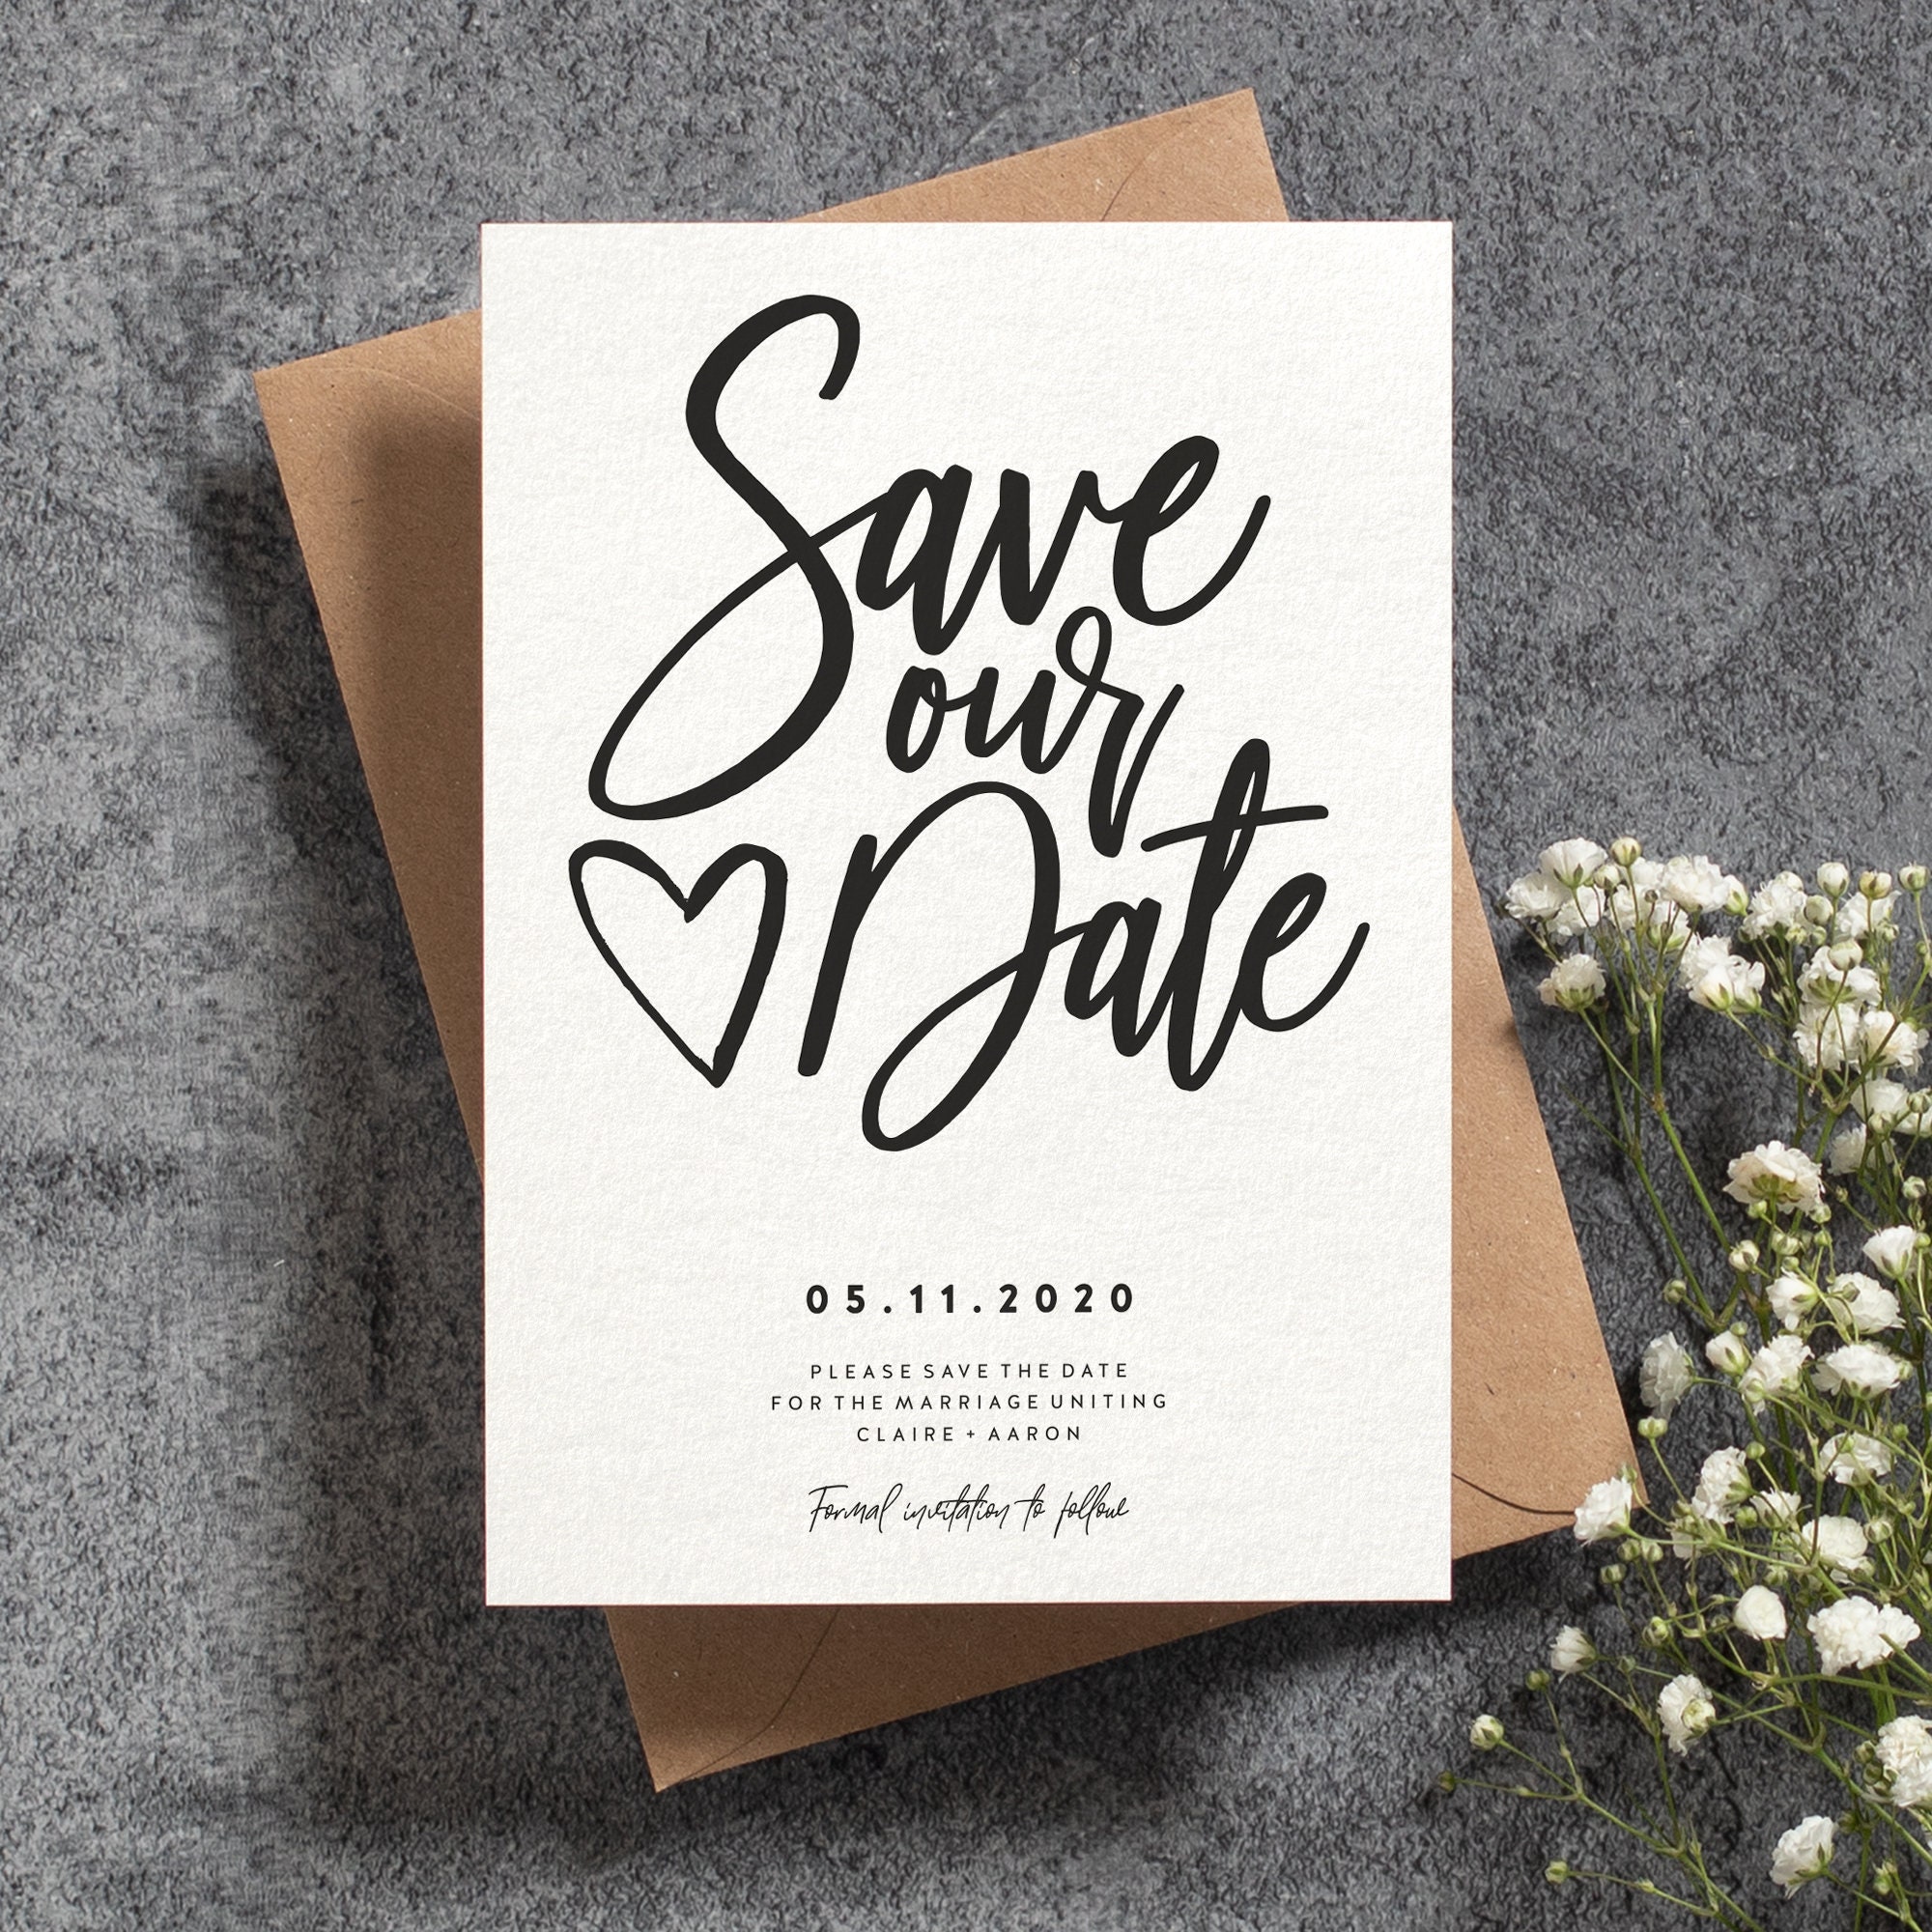 Simple Save the Date Card Save the Date Postcard Modern Save image